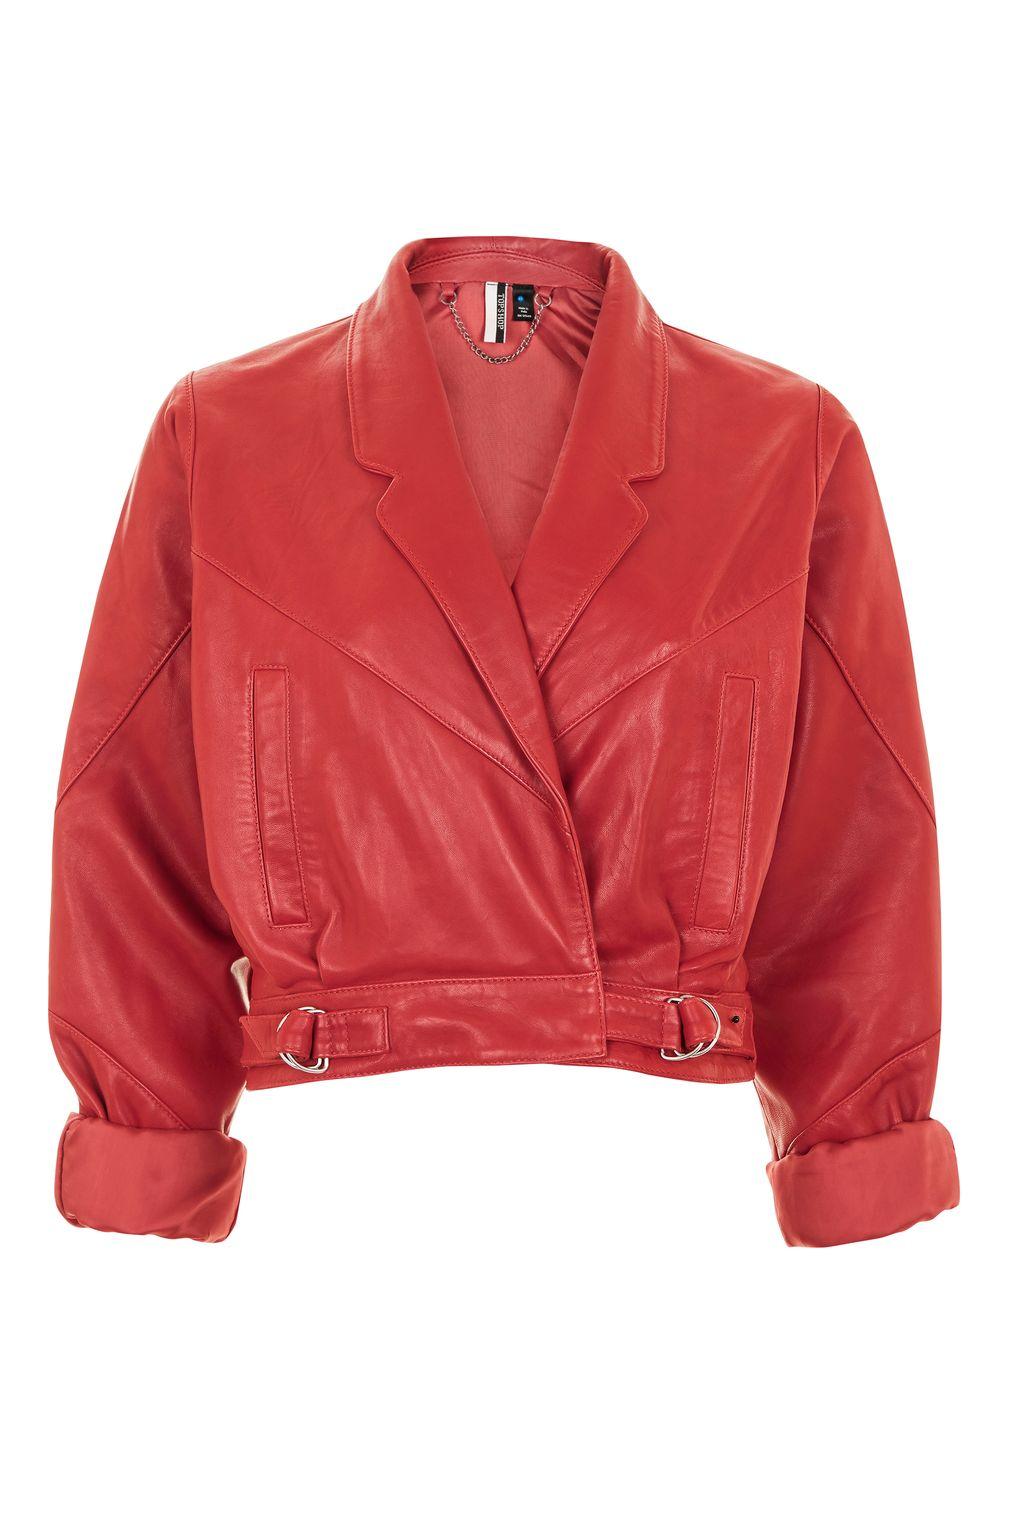 TOPSHOP Maggie Cropped Leather Jacket in Red - Lyst